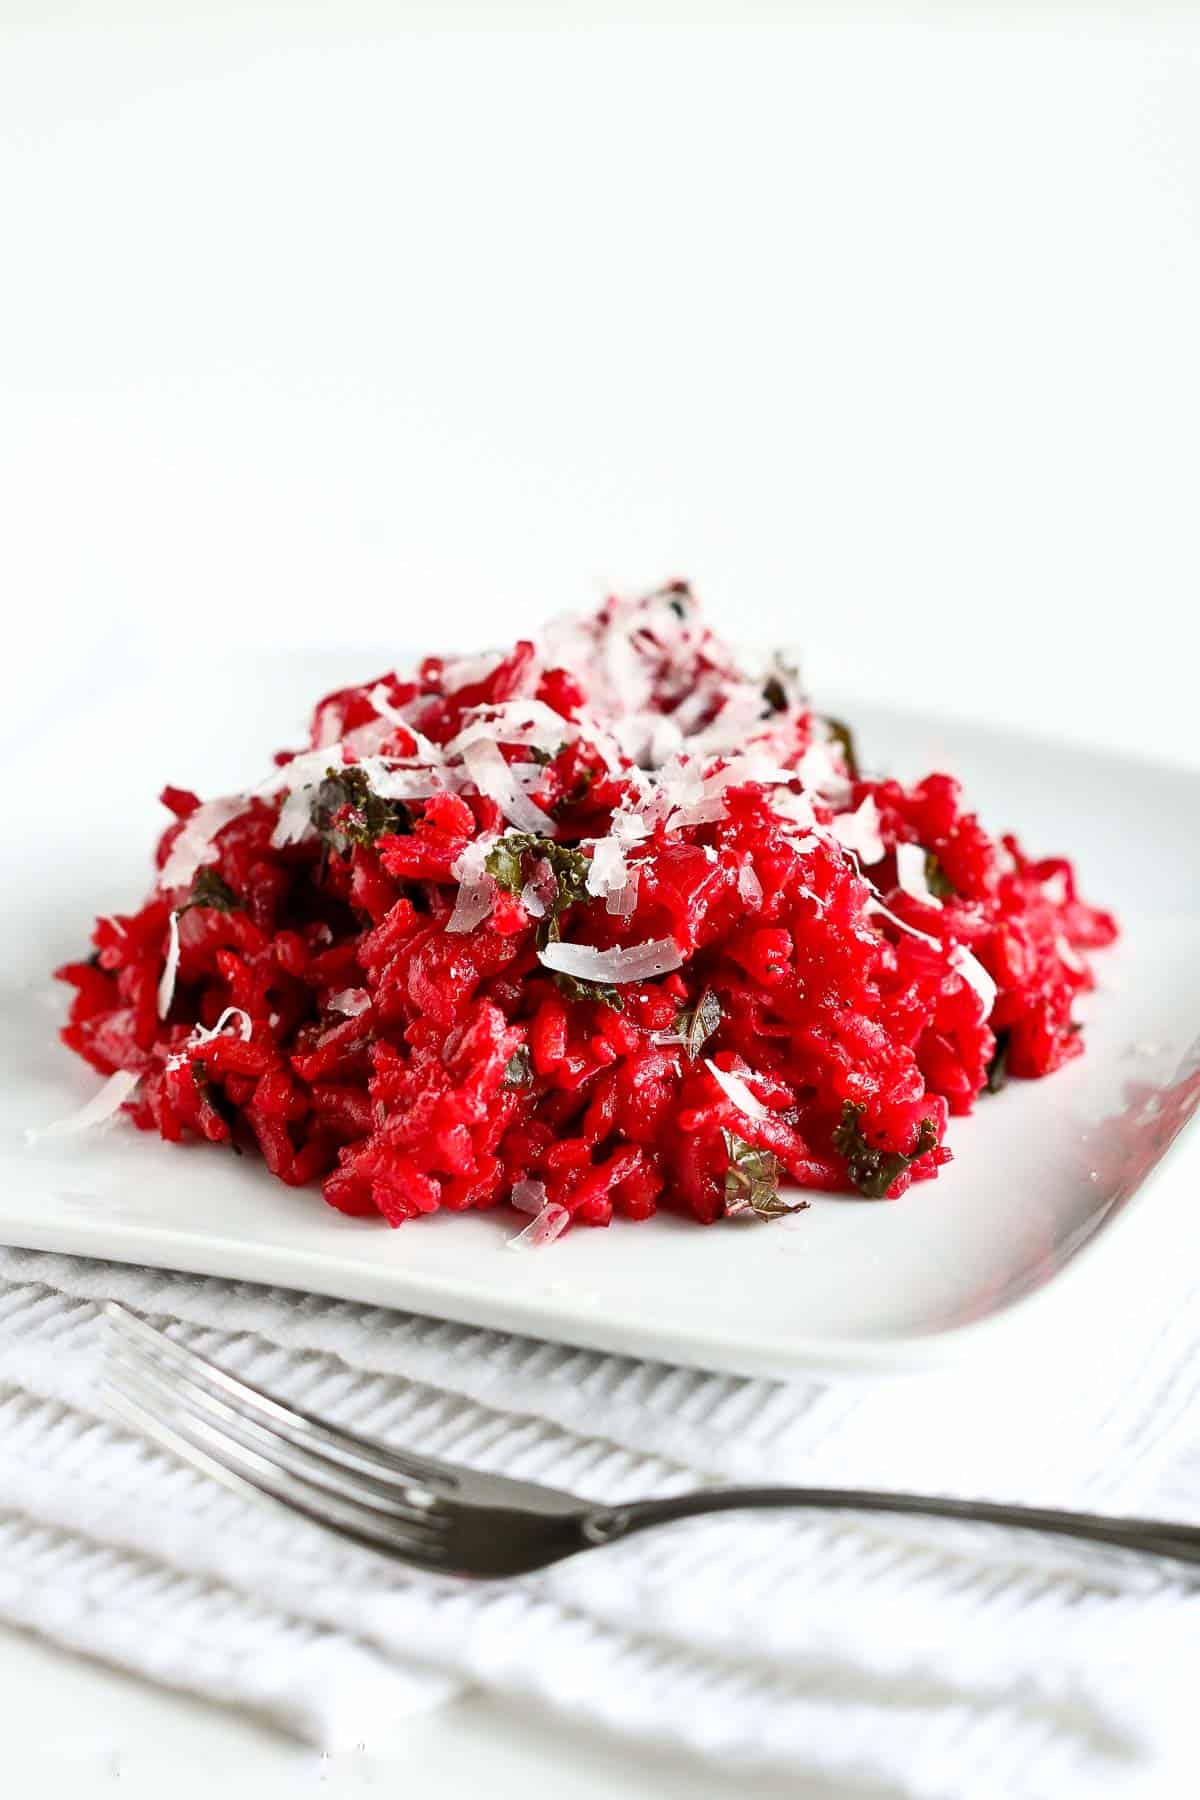 Beetroot risotto with bit of kale mixed in on a white plate.